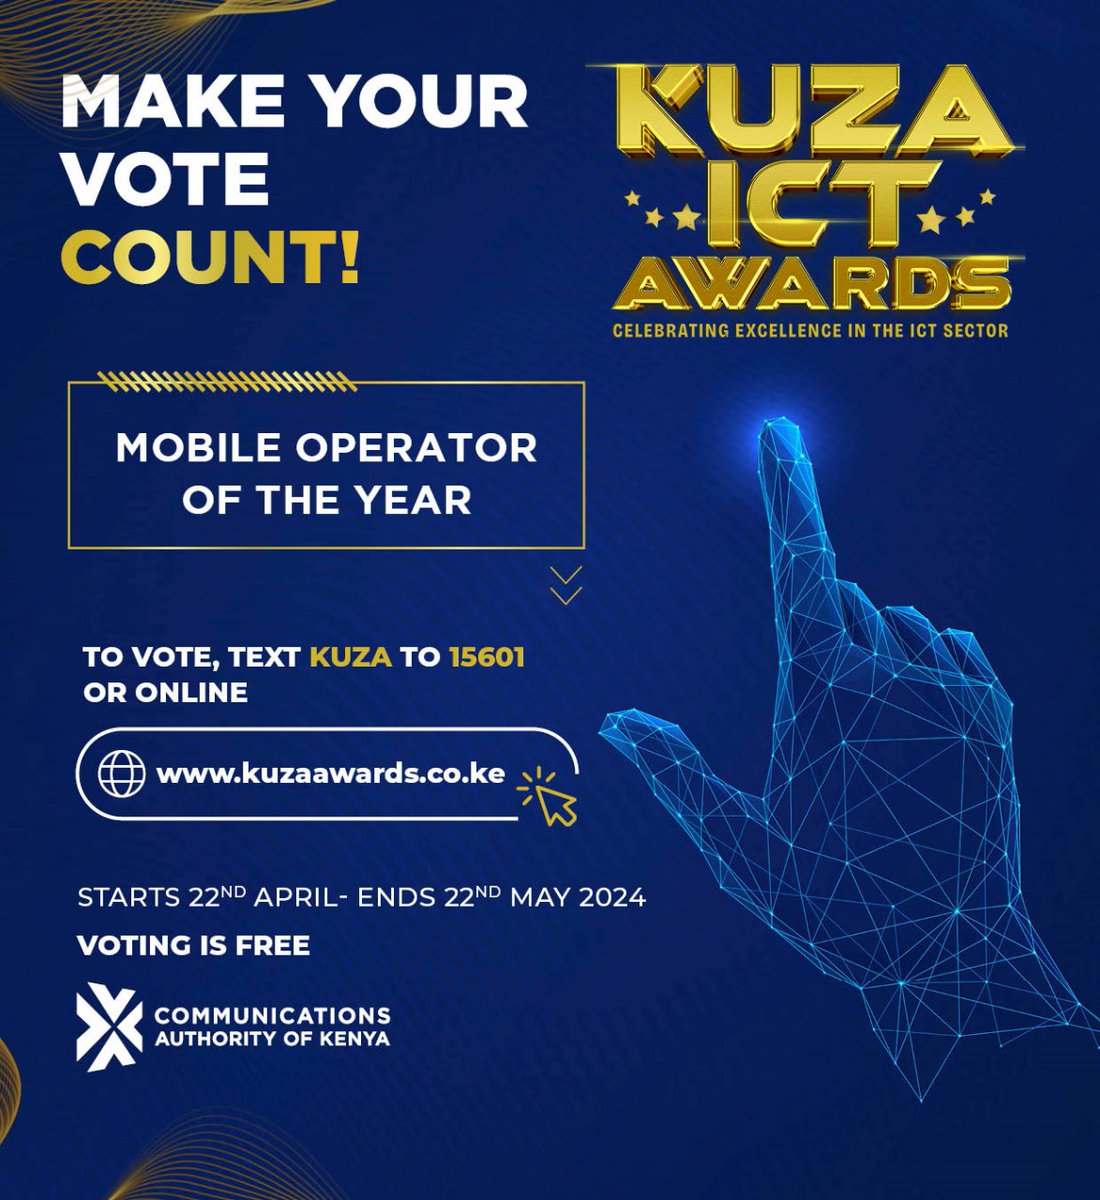 Make your vote count in the Kuza ICT Awards! Celebrate excellence in the ICT sector by voting for your favorite mobile operator of the year. Text 'KUZA' to 15601 or vote online at kuzaawards.co.ke. Voting is free and open till May 22nd, 2024.#KuzaICTAwards2024